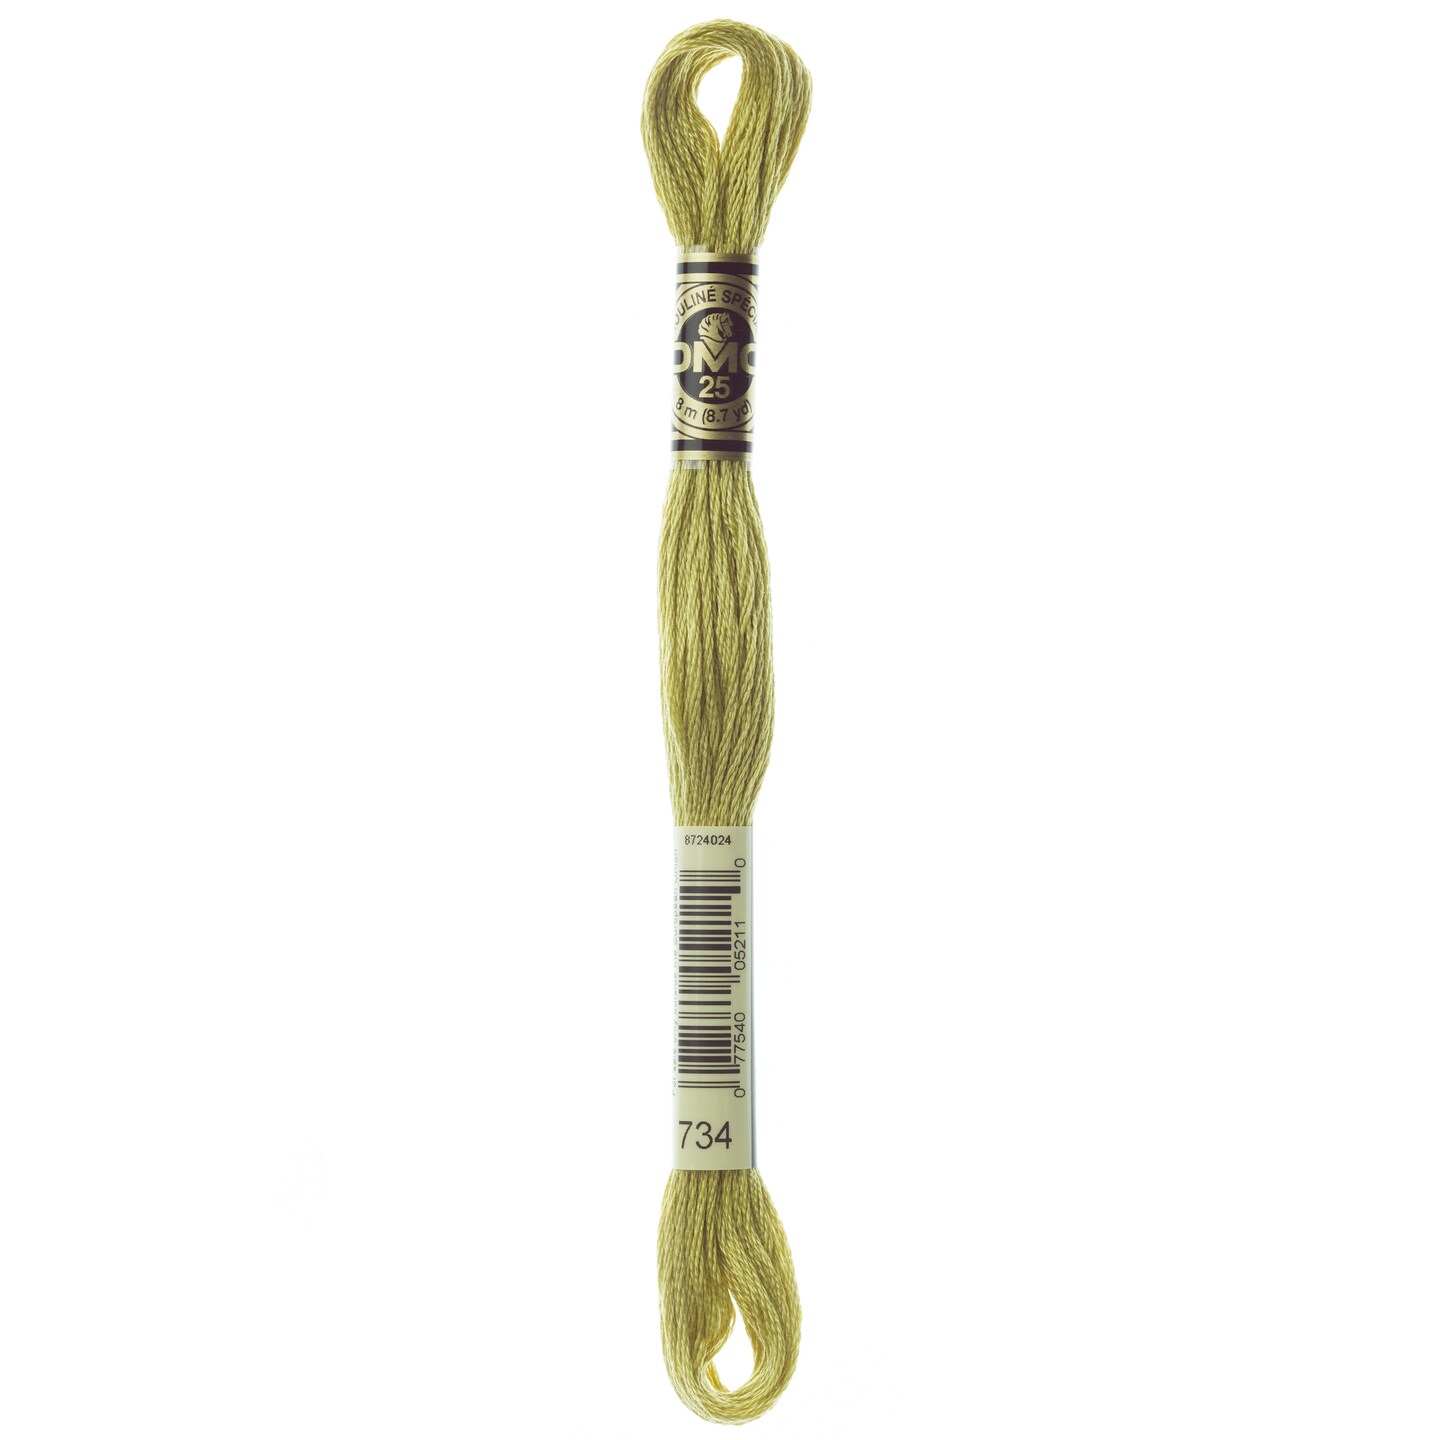 DMC 6-Strand Embroidery Cotton 8.7yd-Light Olive Green